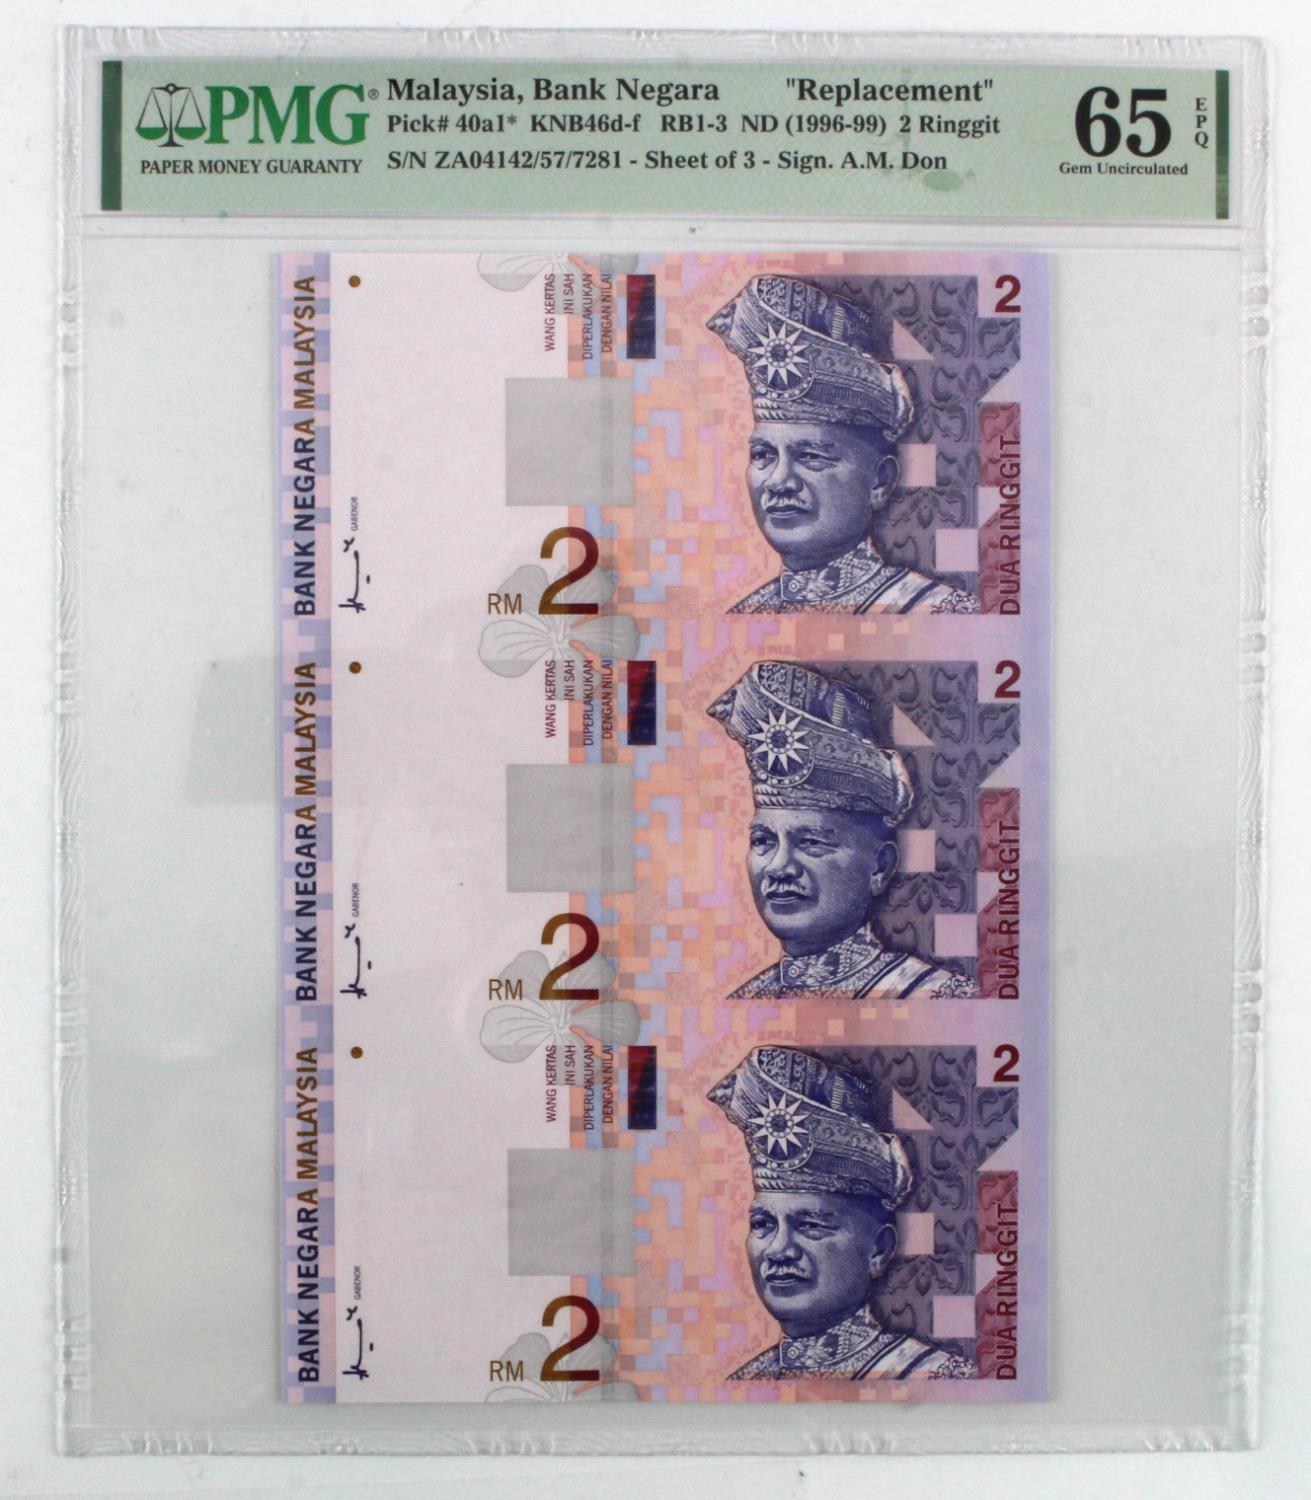 Malaysia 2 Ringgit (3) issued 1996 - 1999, an uncut sheet of 3 REPLACEMENT notes signed A.M. Don,